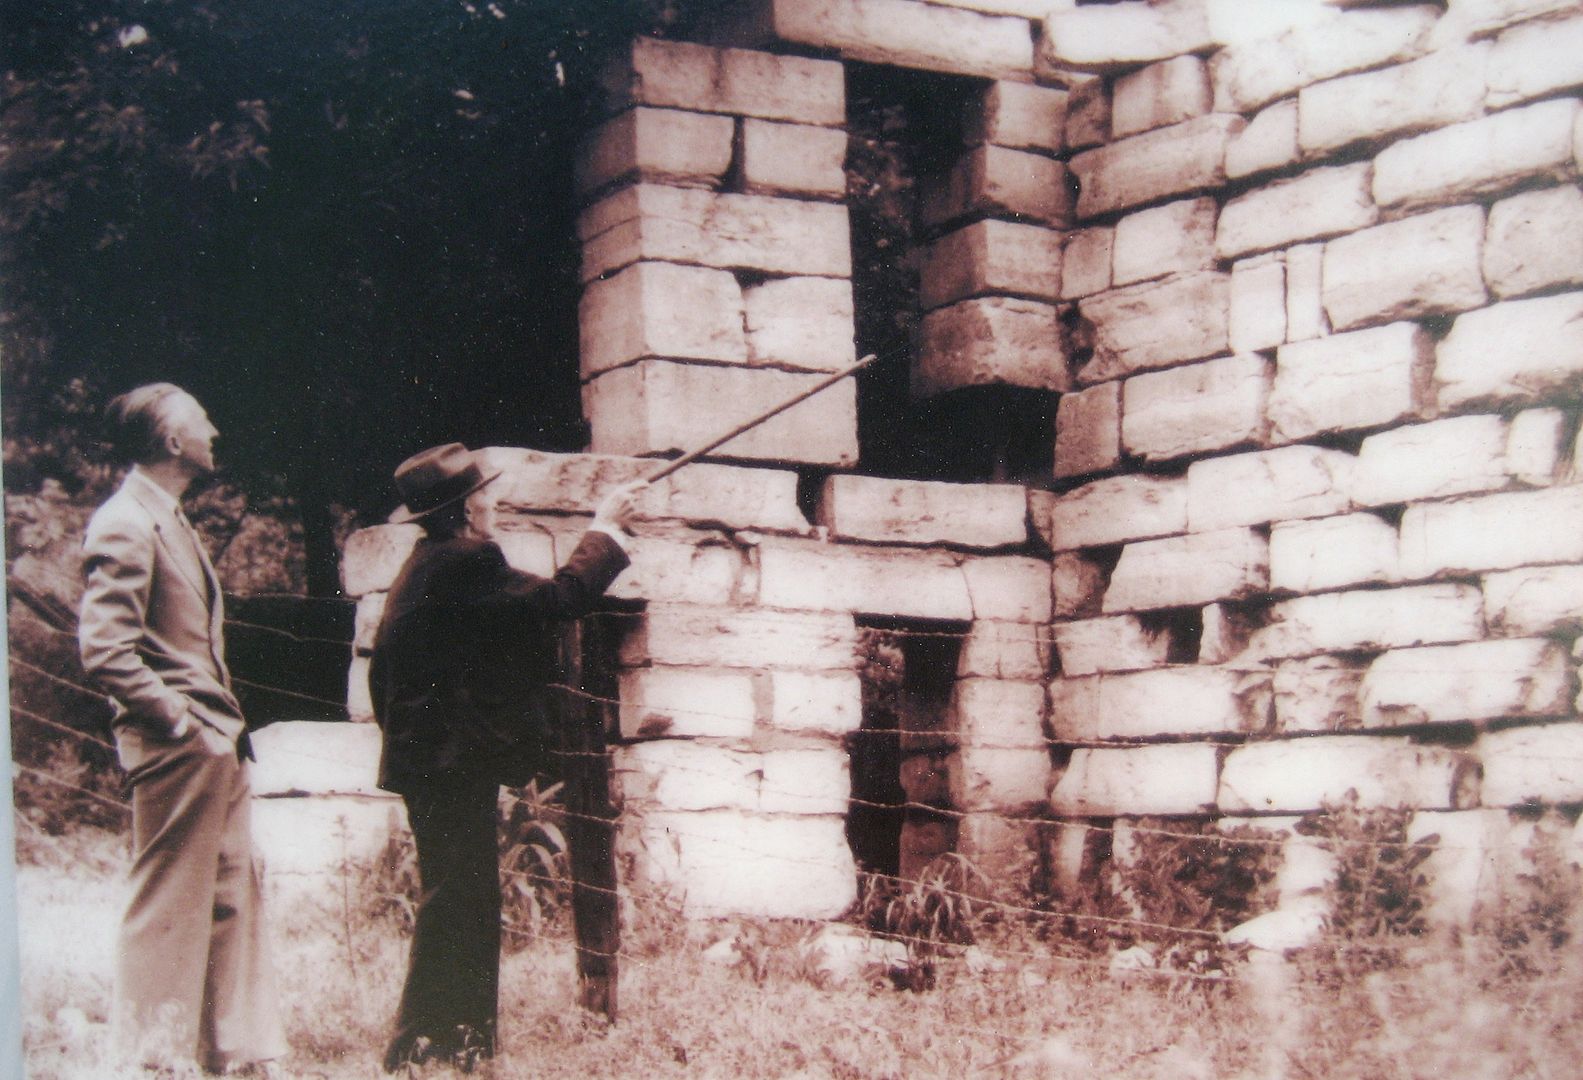 In 1935, surviving Confederate soldier returned to the site. 